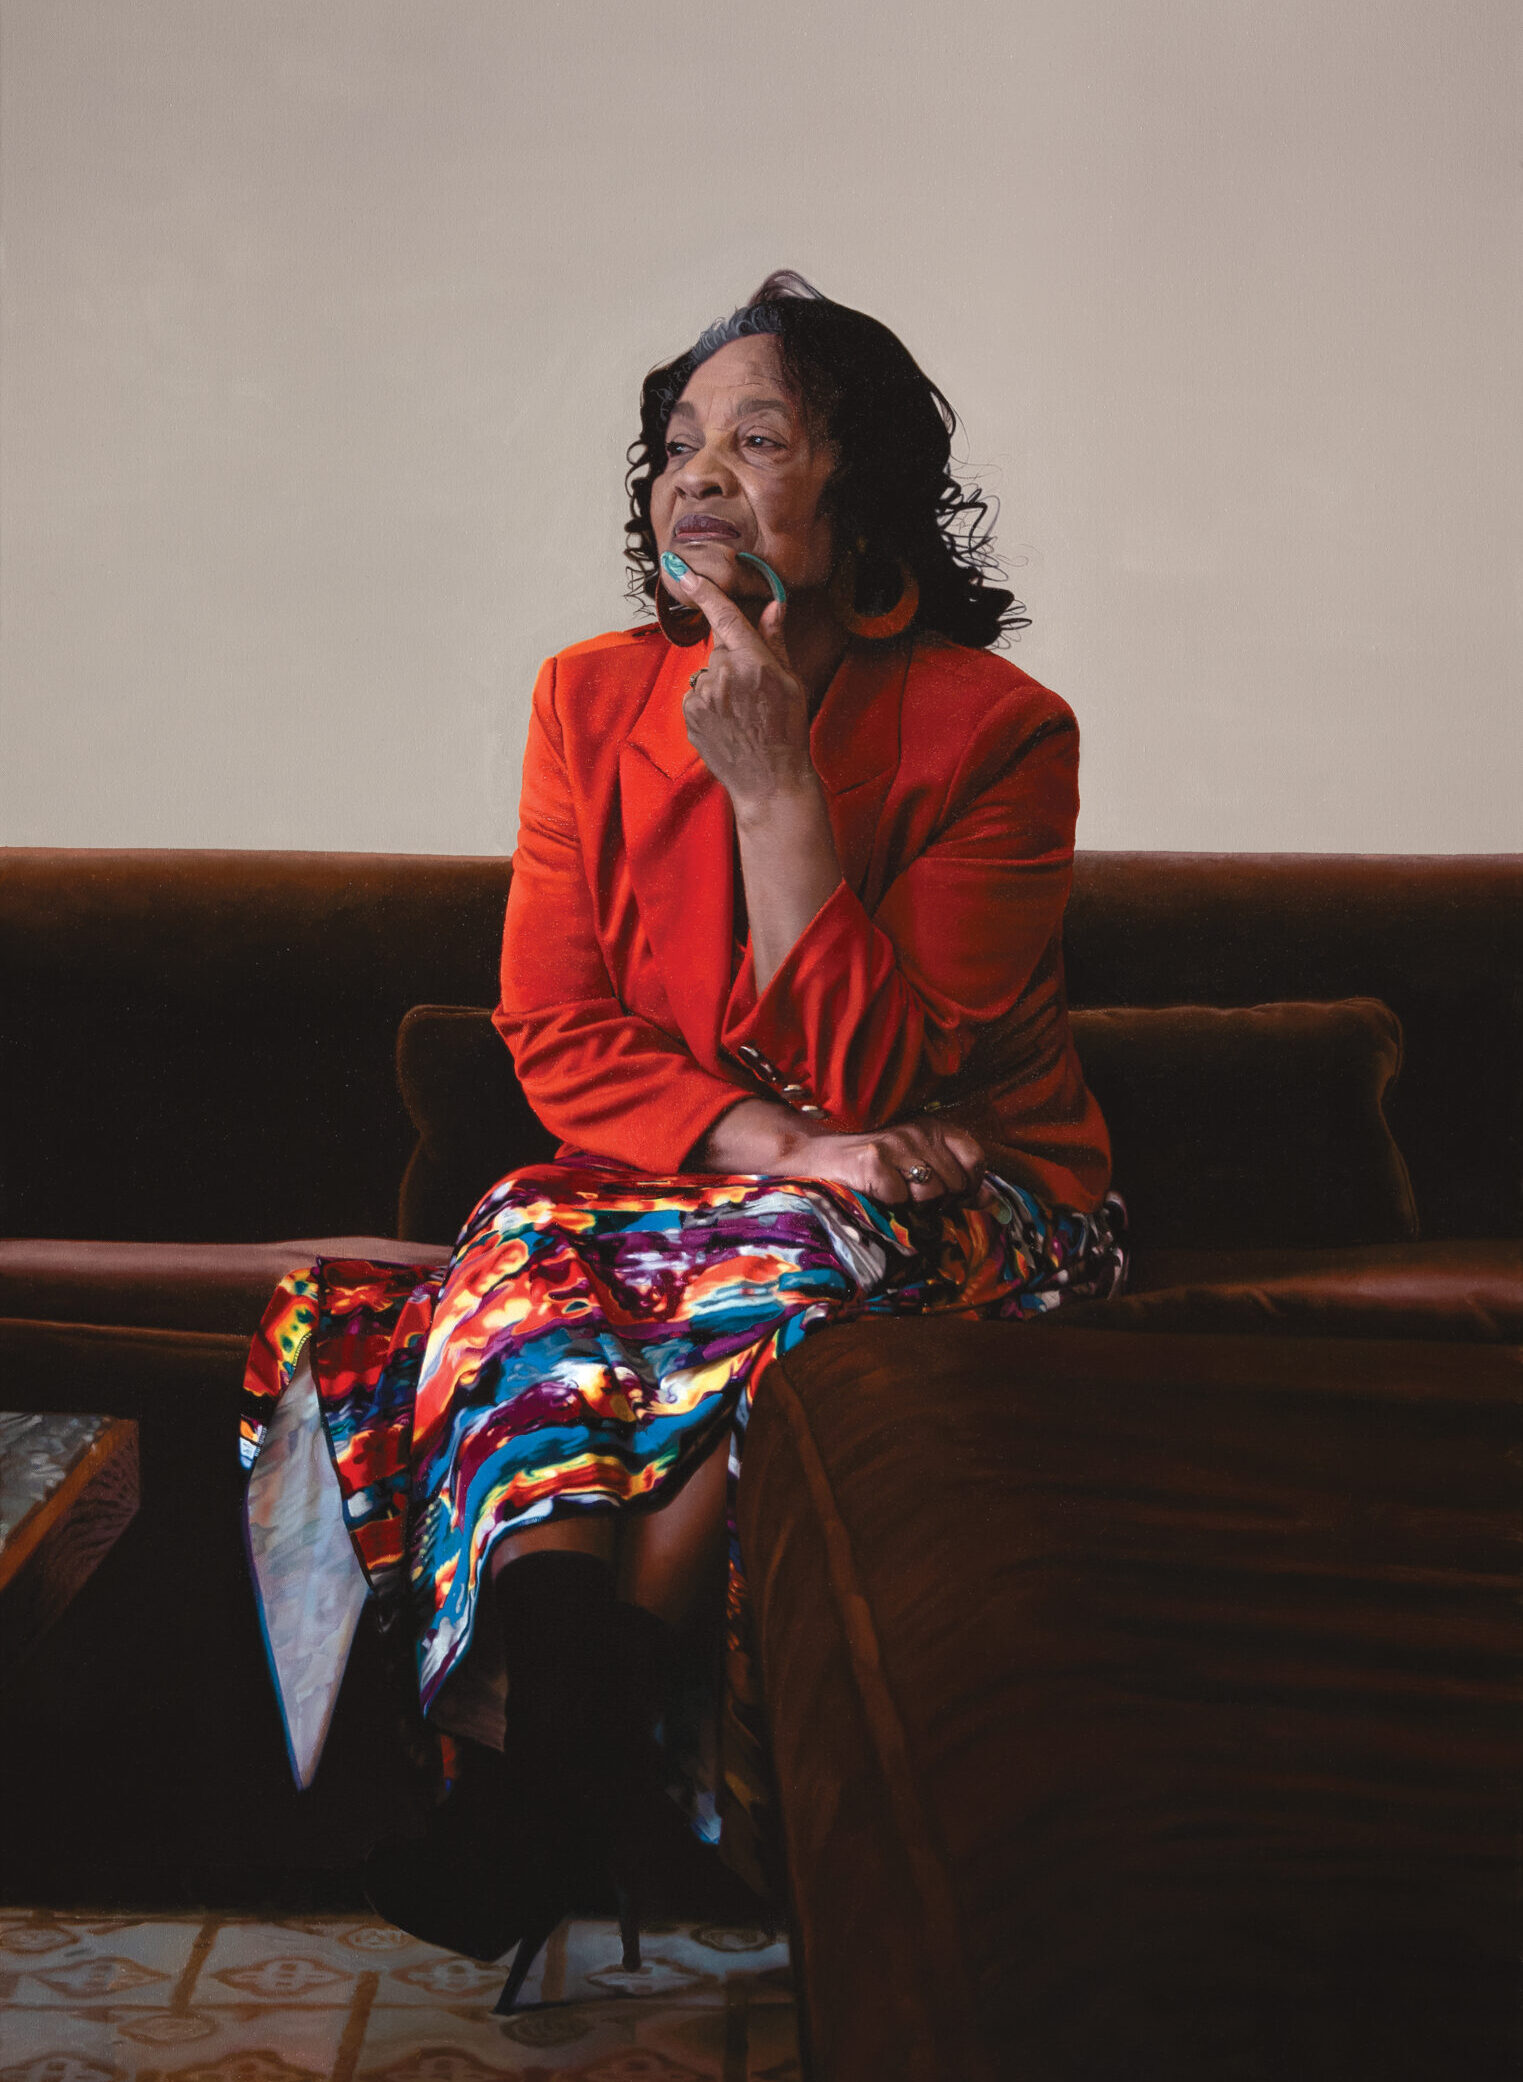 A painting of an older person wearing a bright red jacket and patterned skirt, sitting on a couch. They have bright blue nails and have one of their hands resting by their chin.